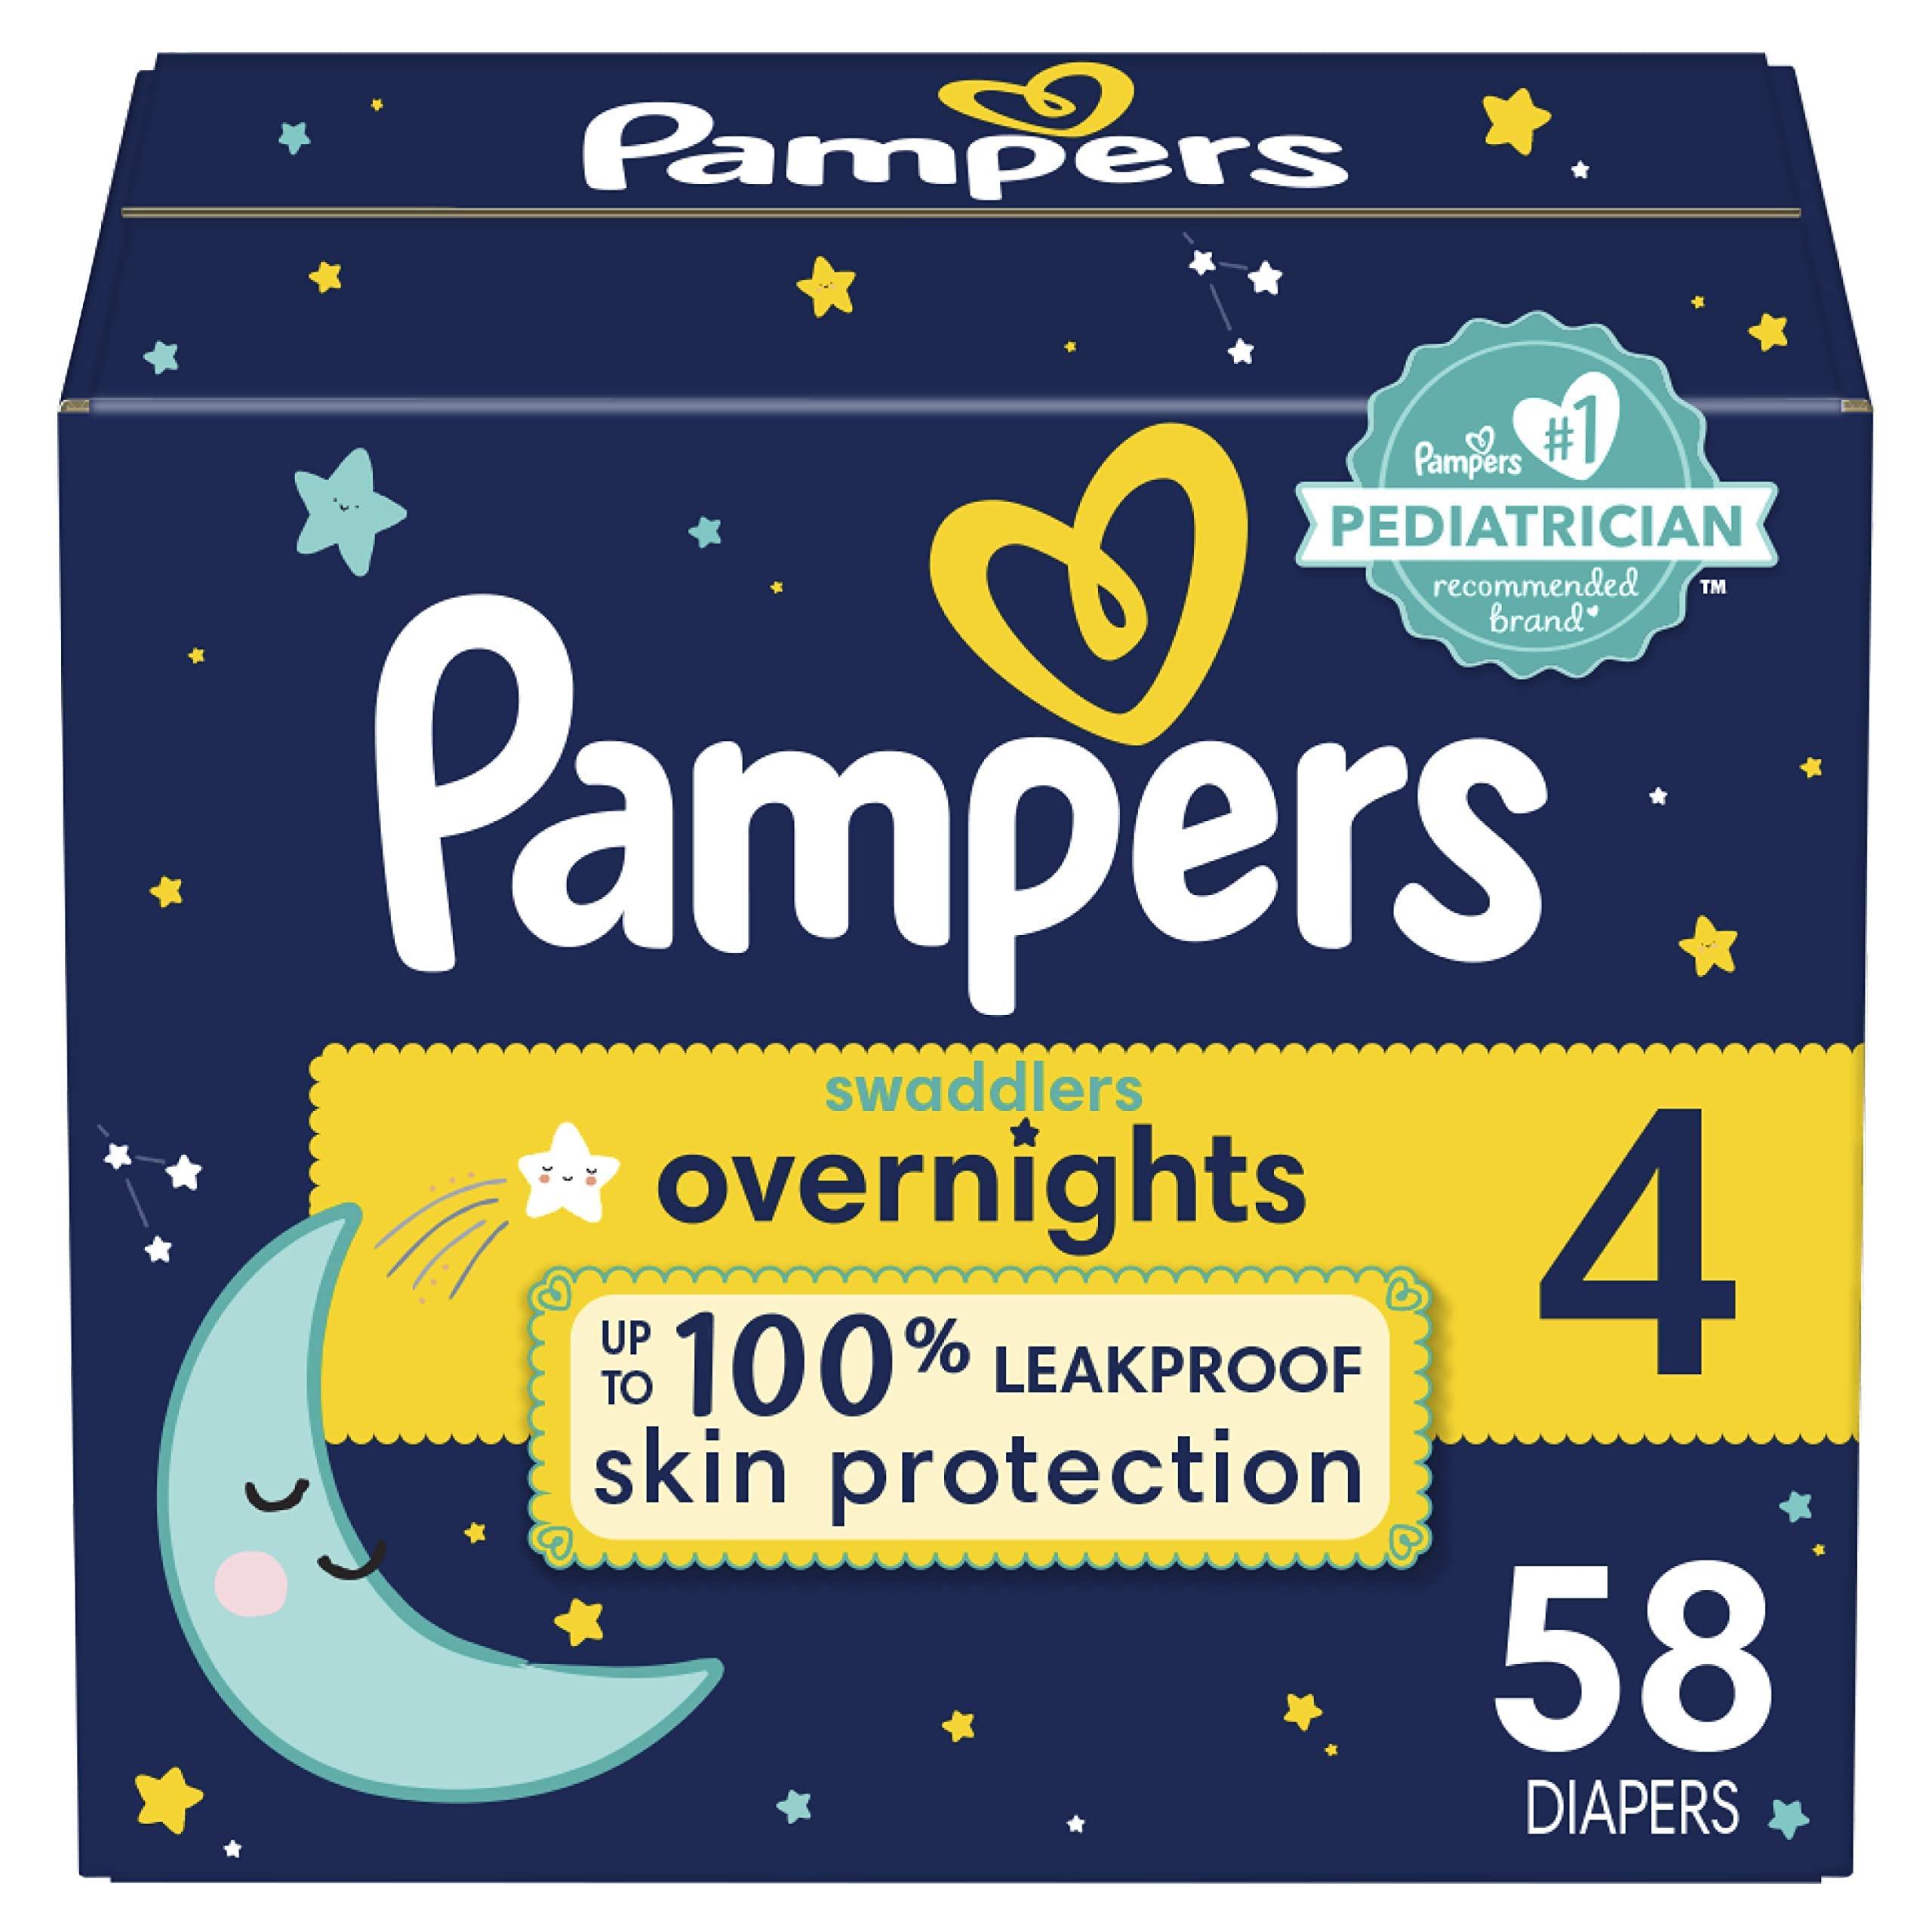 Diapers Size 4, 58 Count - Pampers Swaddlers Overnights Disposable Baby Diapers, Super Pack (Packaging & Prints May Vary)